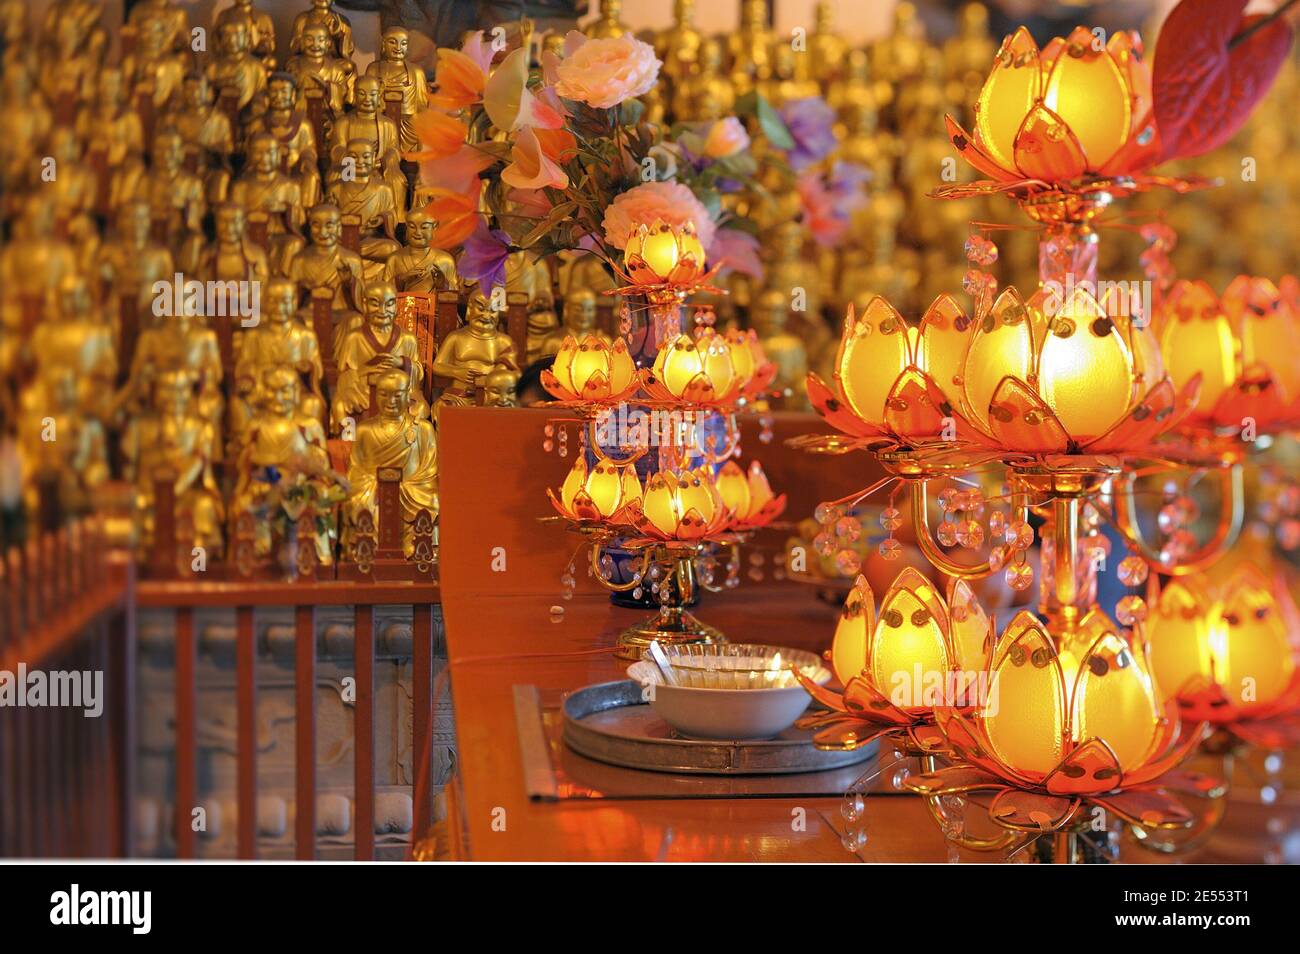 Gold buddhist statue in Longhua temple. Statues of the 500 Lohan Stock Photo